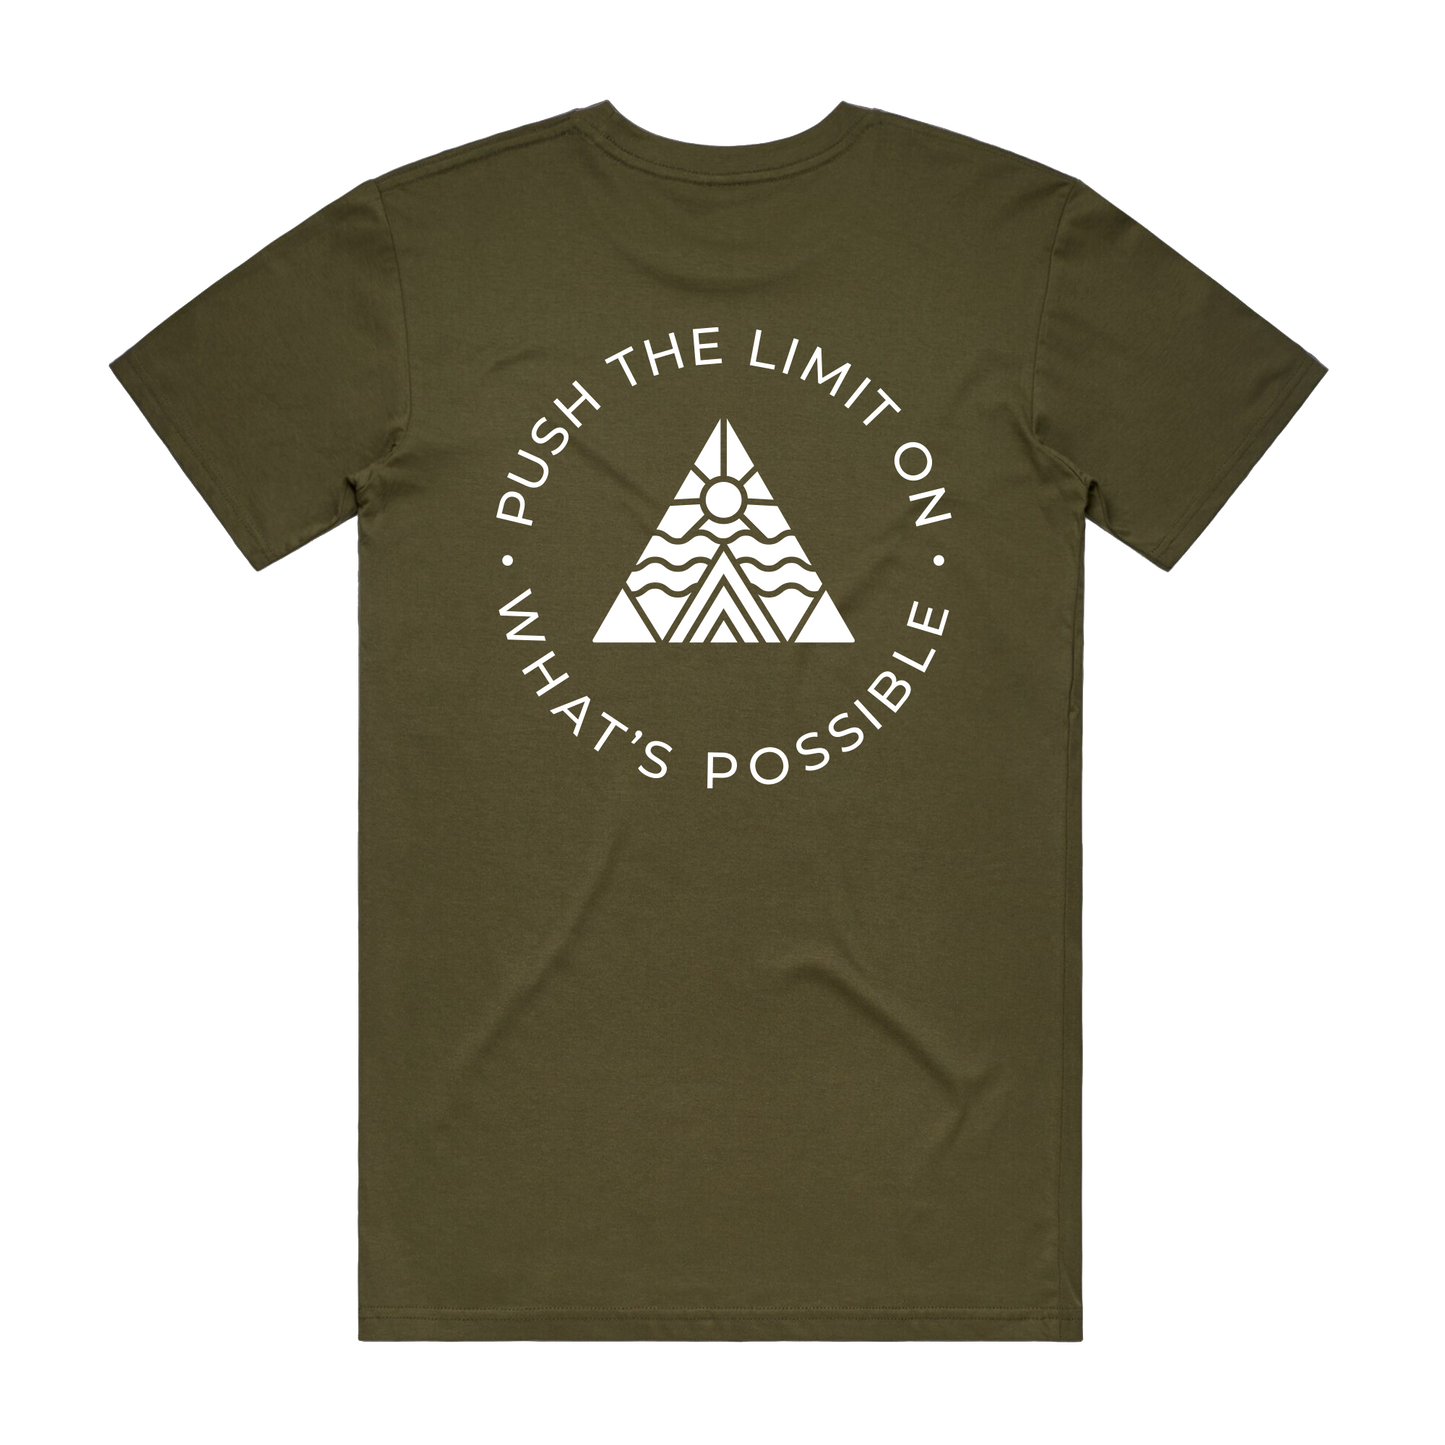 Push the Limit Tees